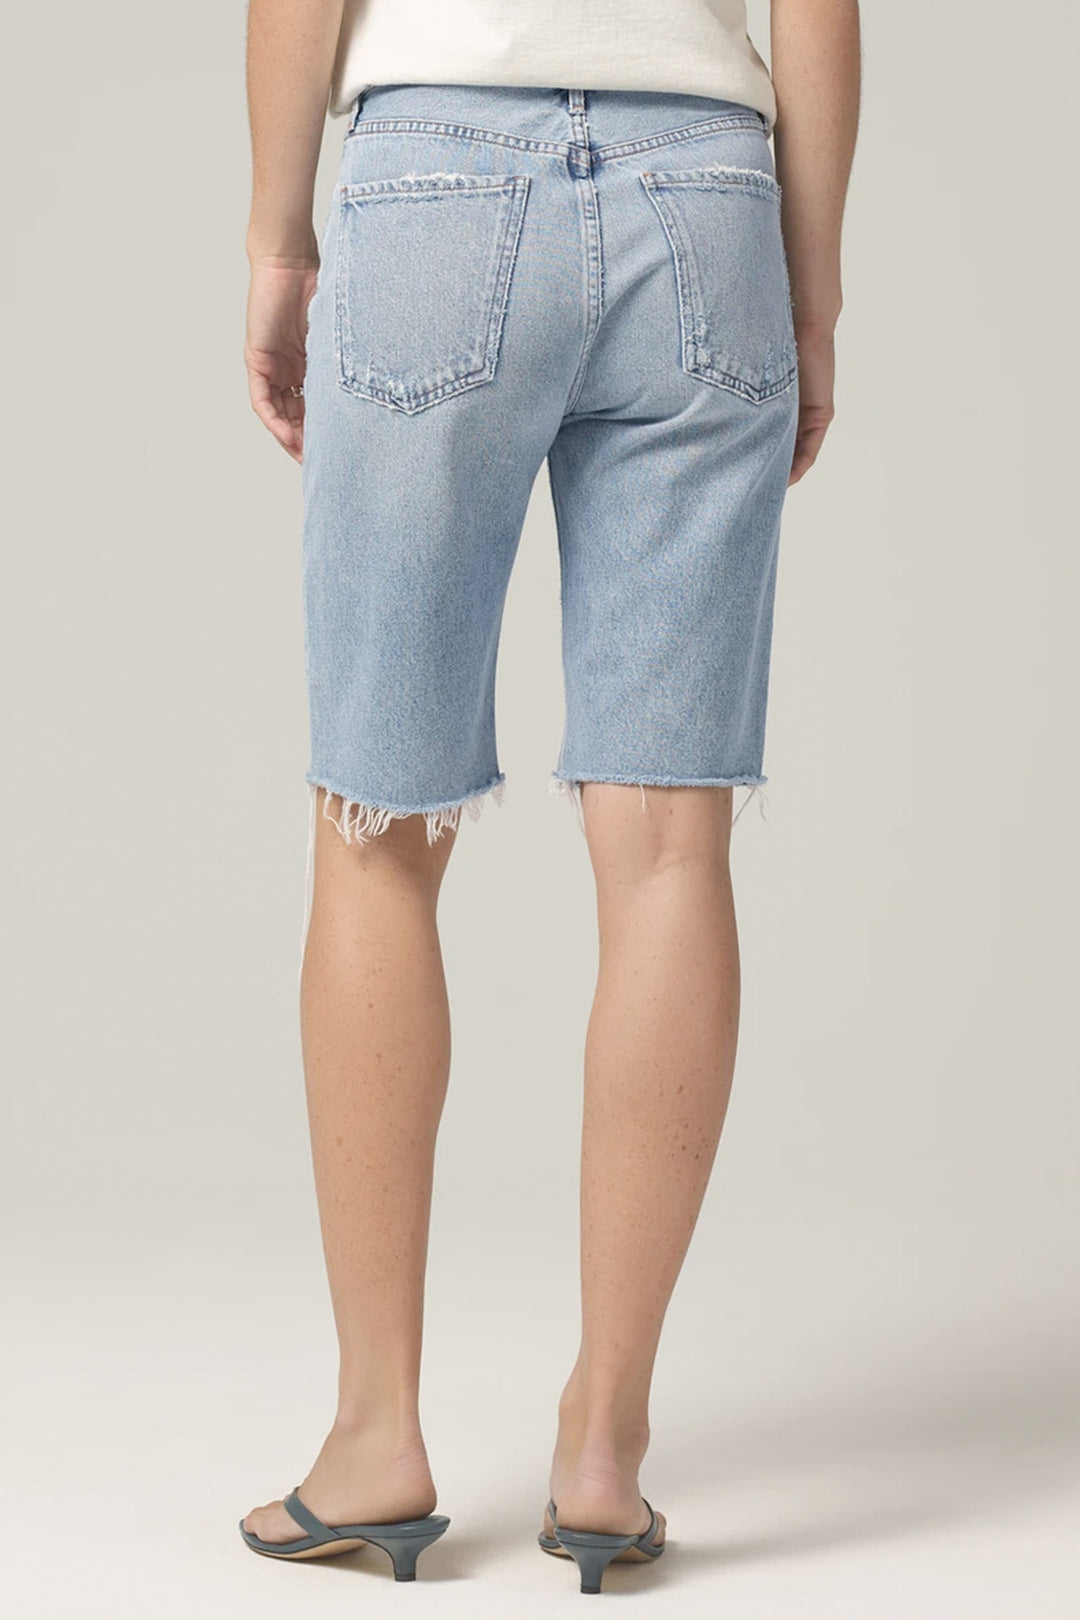 Citizens of Humanity - Libby Relaxed Short in Seventeen